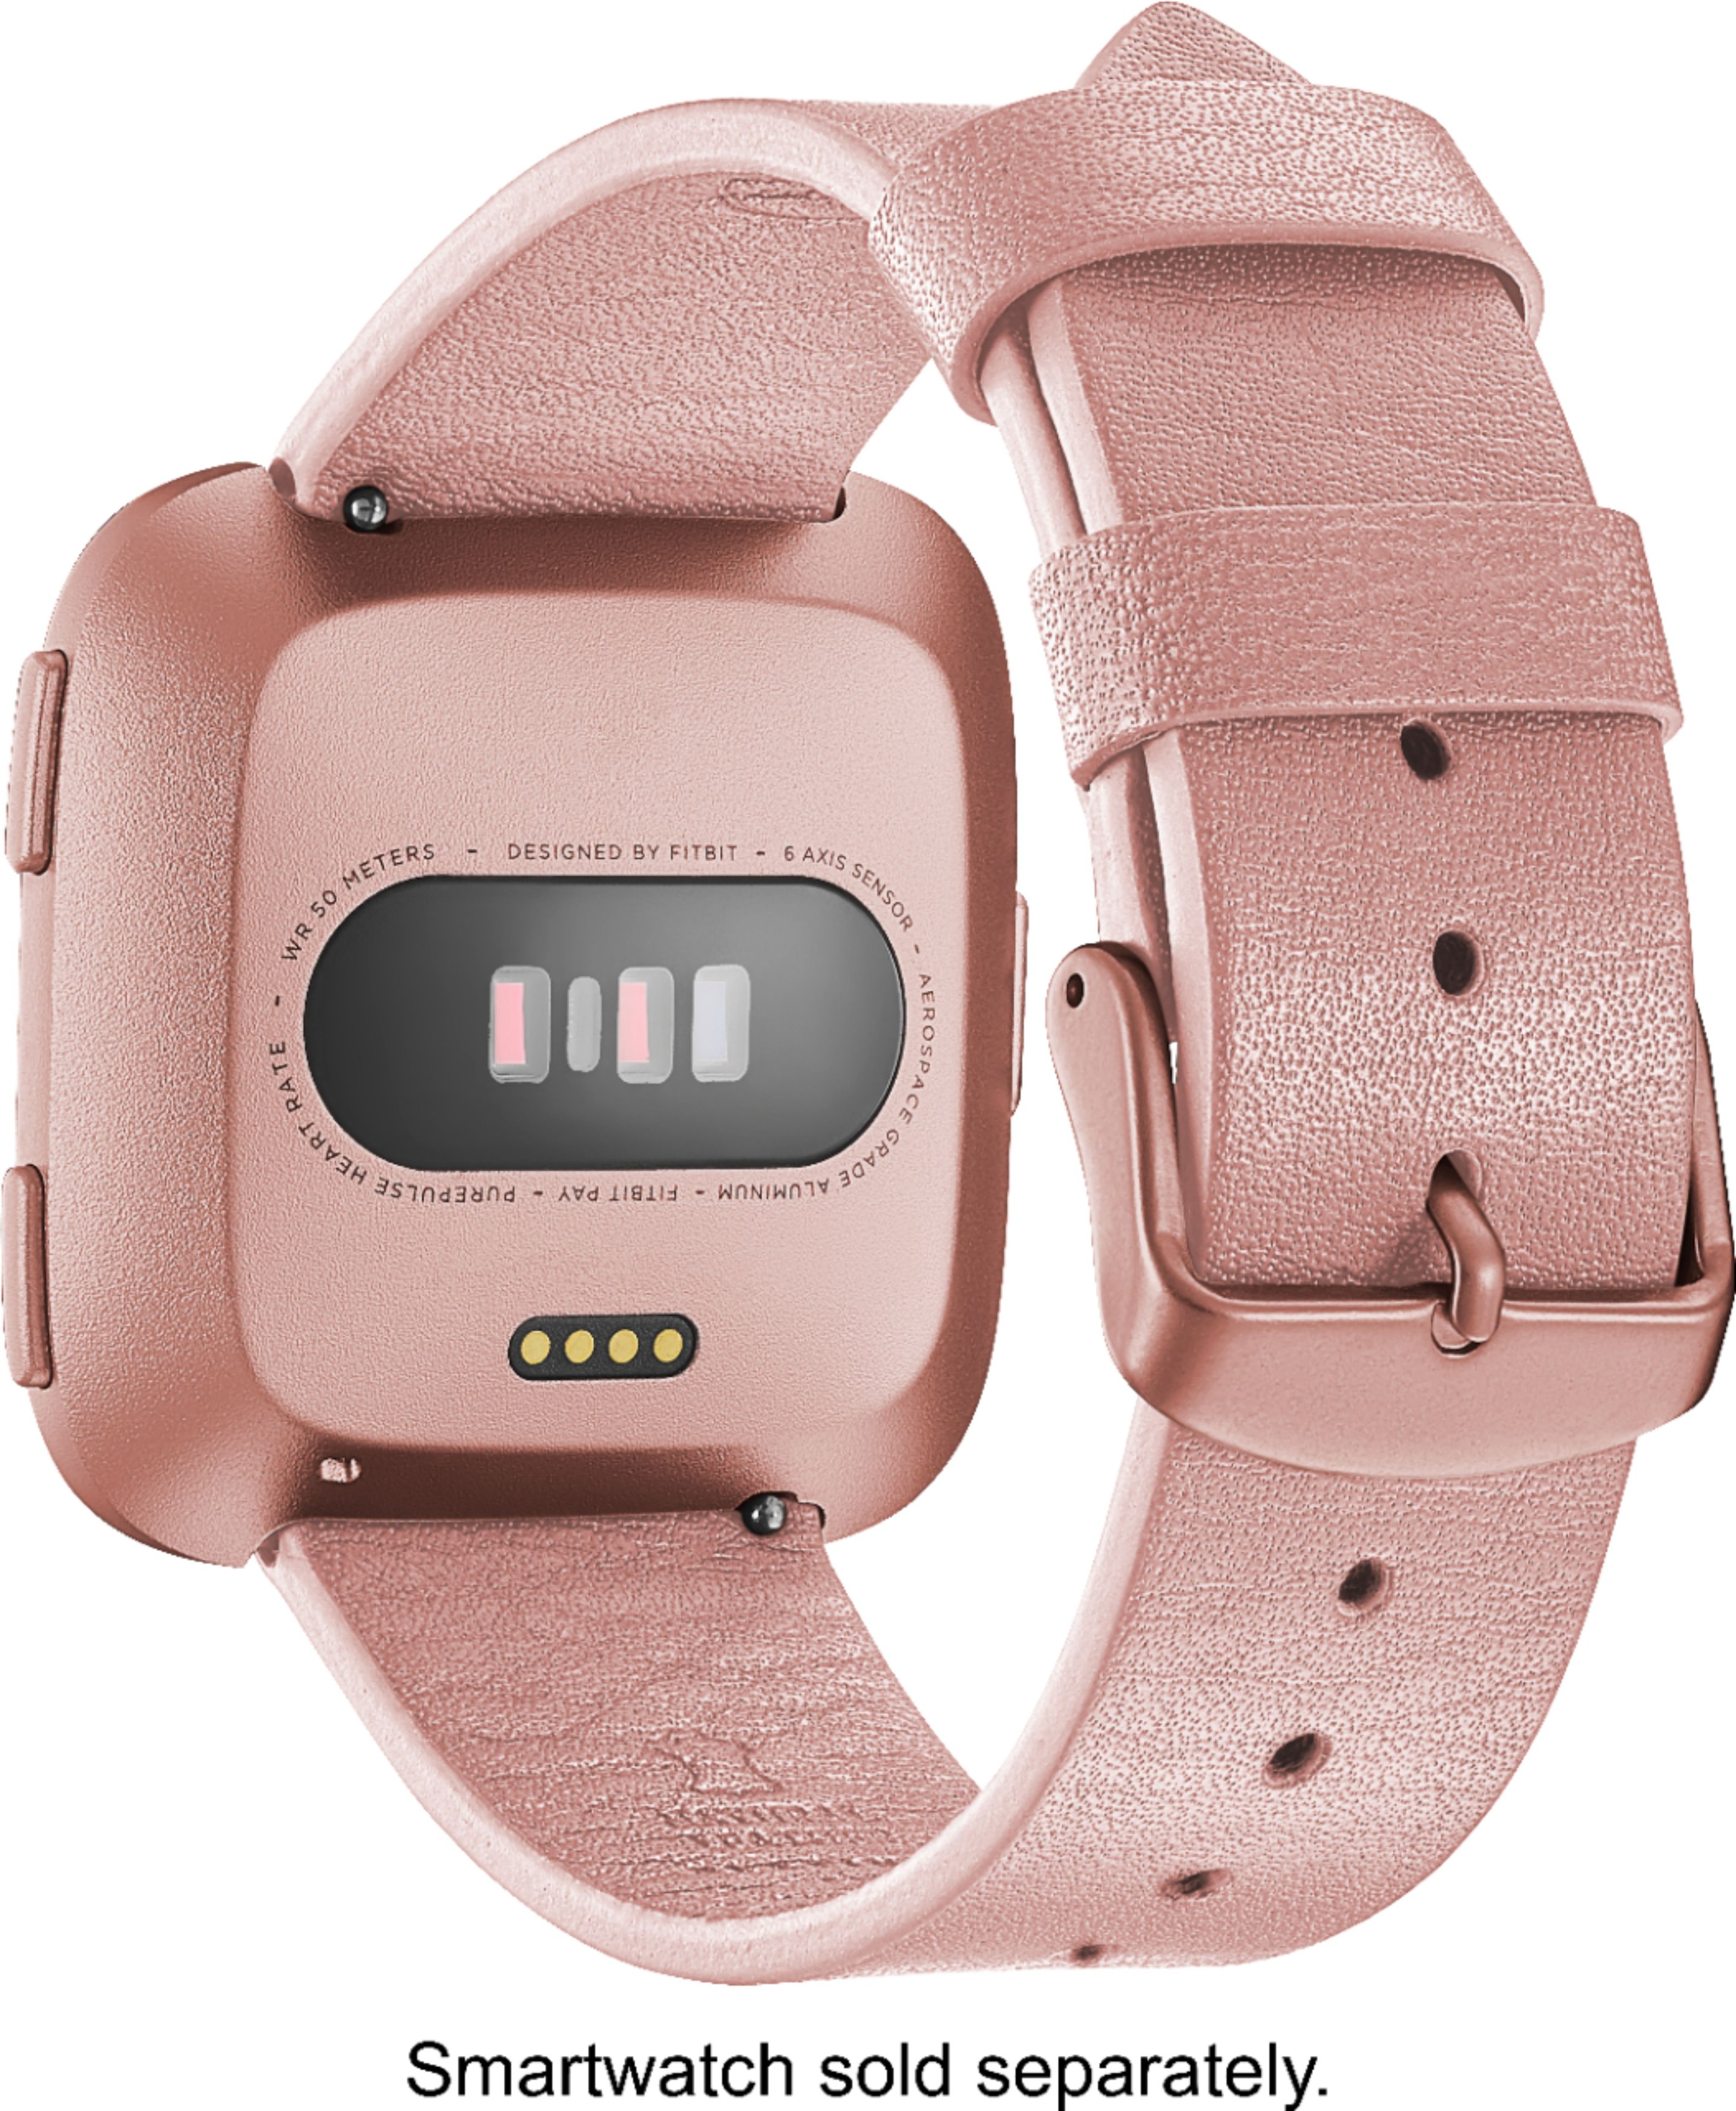 Fair Fitbit Versa AS1042 Pink Color w/out Charger or Band 